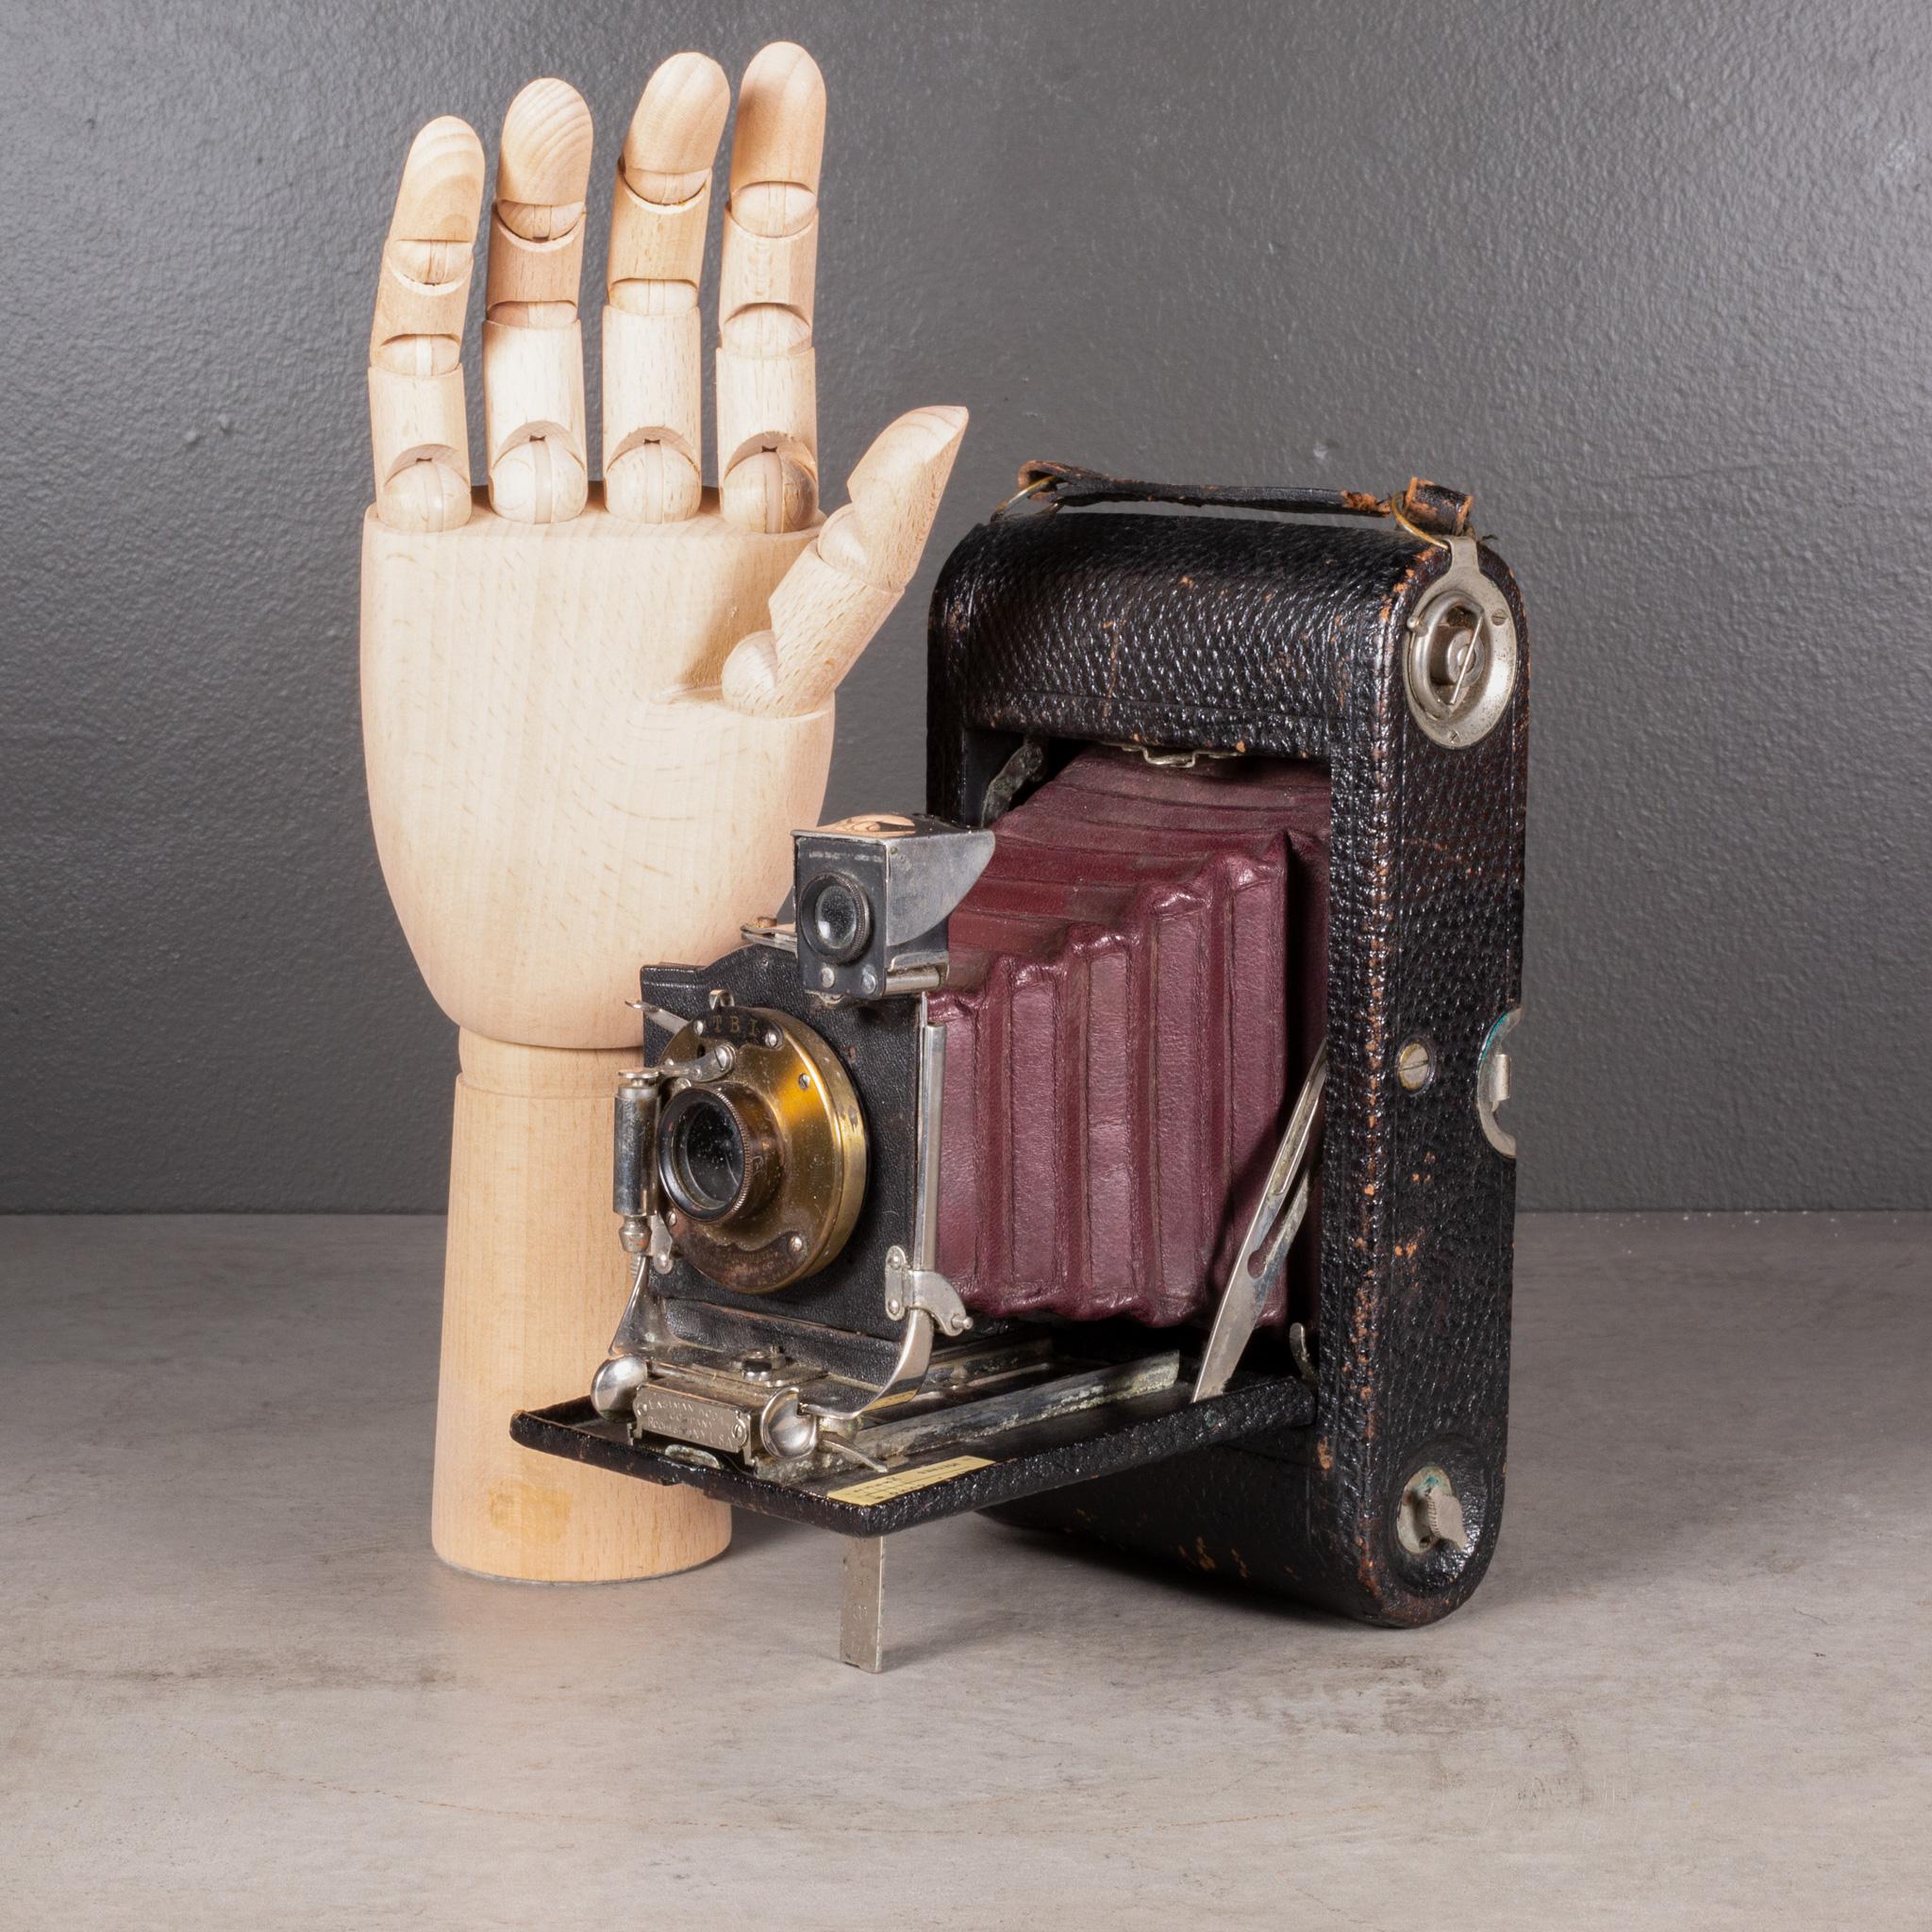 ABOUT

The body is wrapped in leather with red bellows. Chrome, brass and leather accents on the lens. The camera may or may not work but is sold as a decorative object.

Shown with life size hand model.

    CREATOR Eastman Kodak Company
    DATE